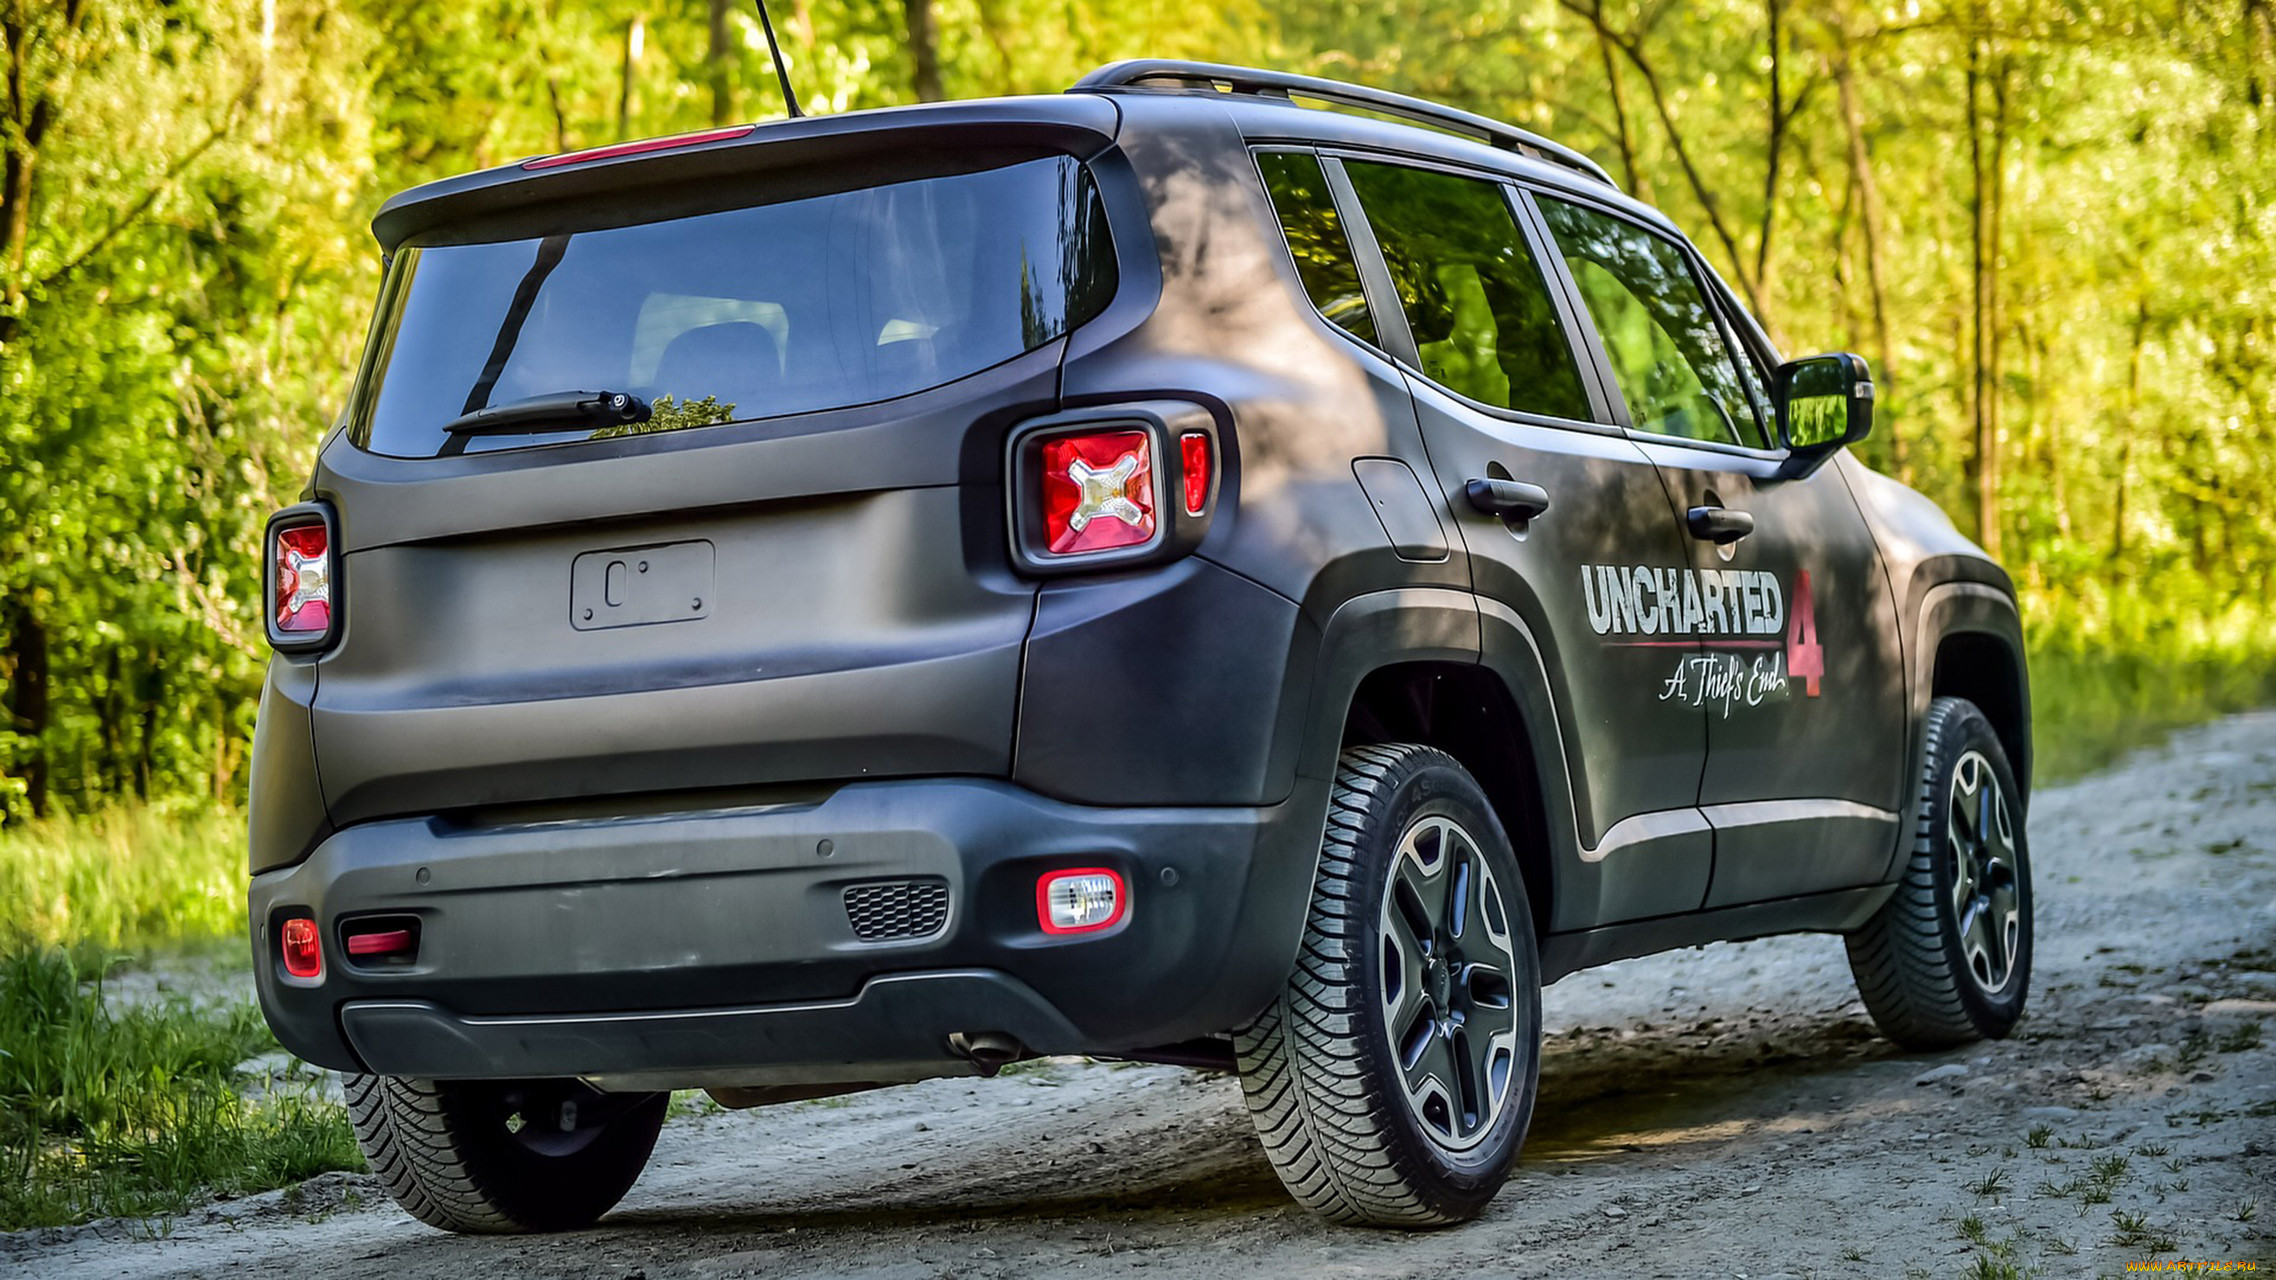 jeep renegade uncharted edition 2016, , jeep, 2016, edition, uncharted, renegade